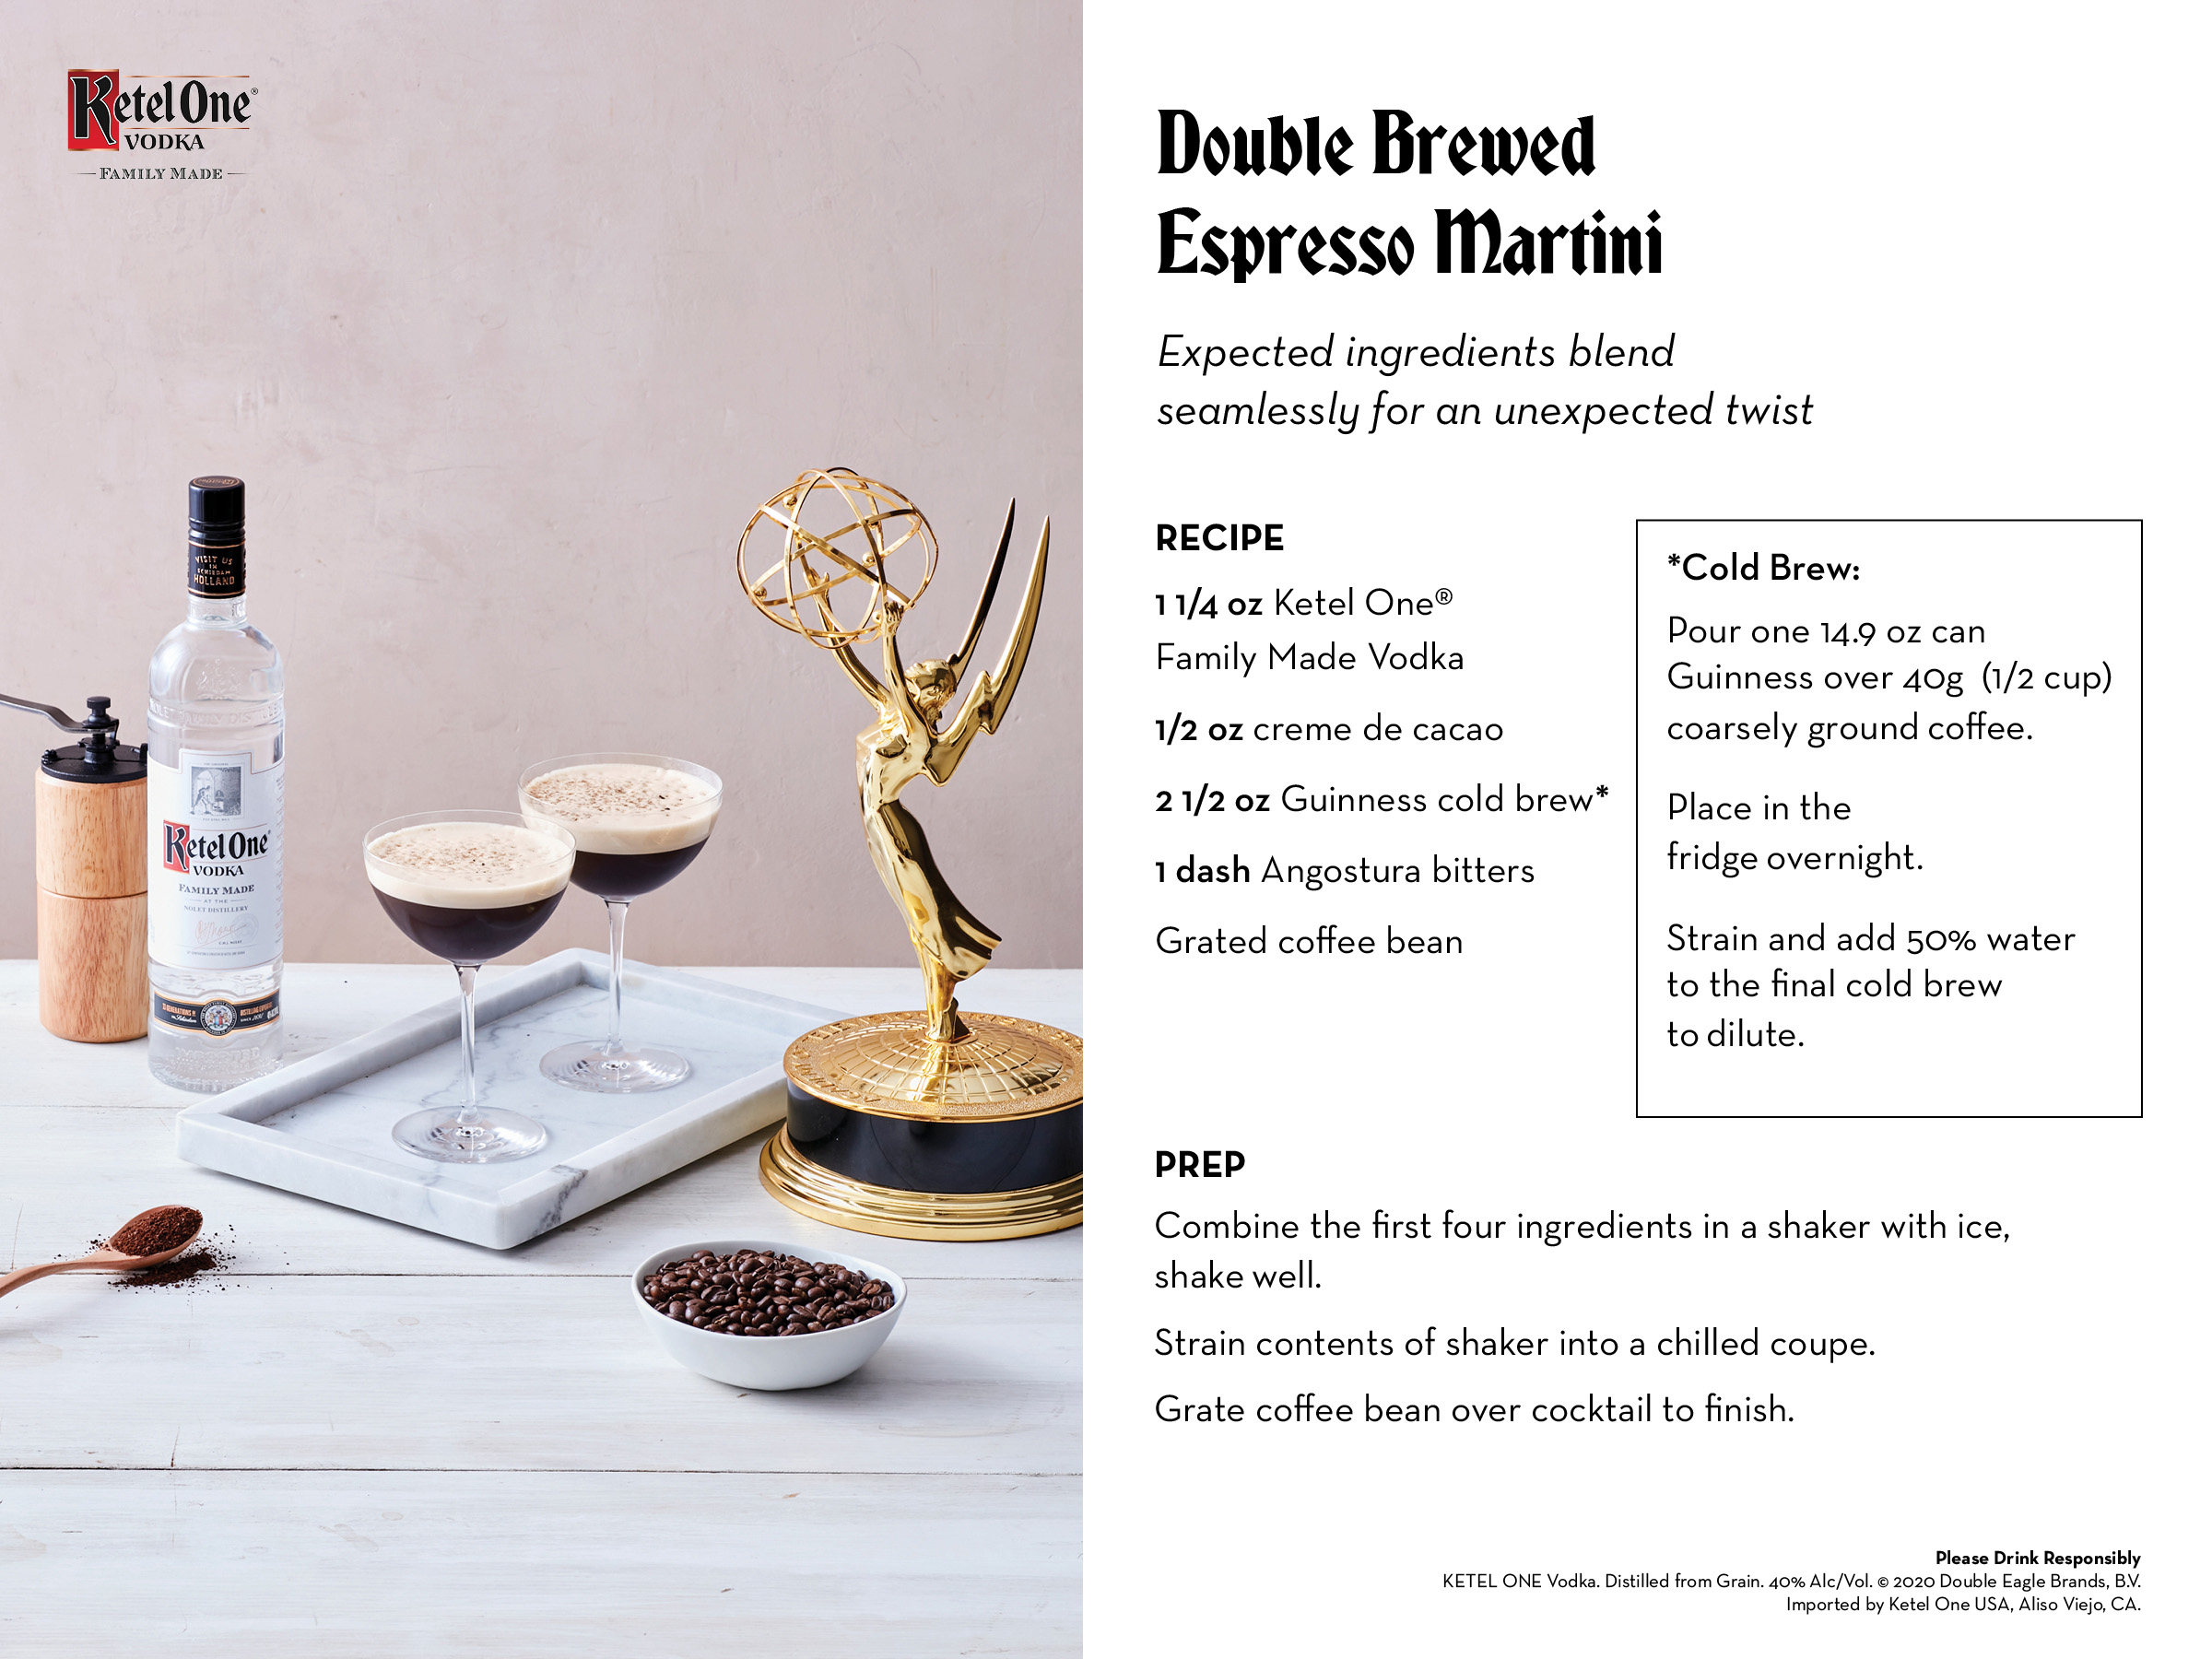 Cold brew, stout and cacao meld seamlessly with Ketel One Vodka for an unexpected take on the espresso martini